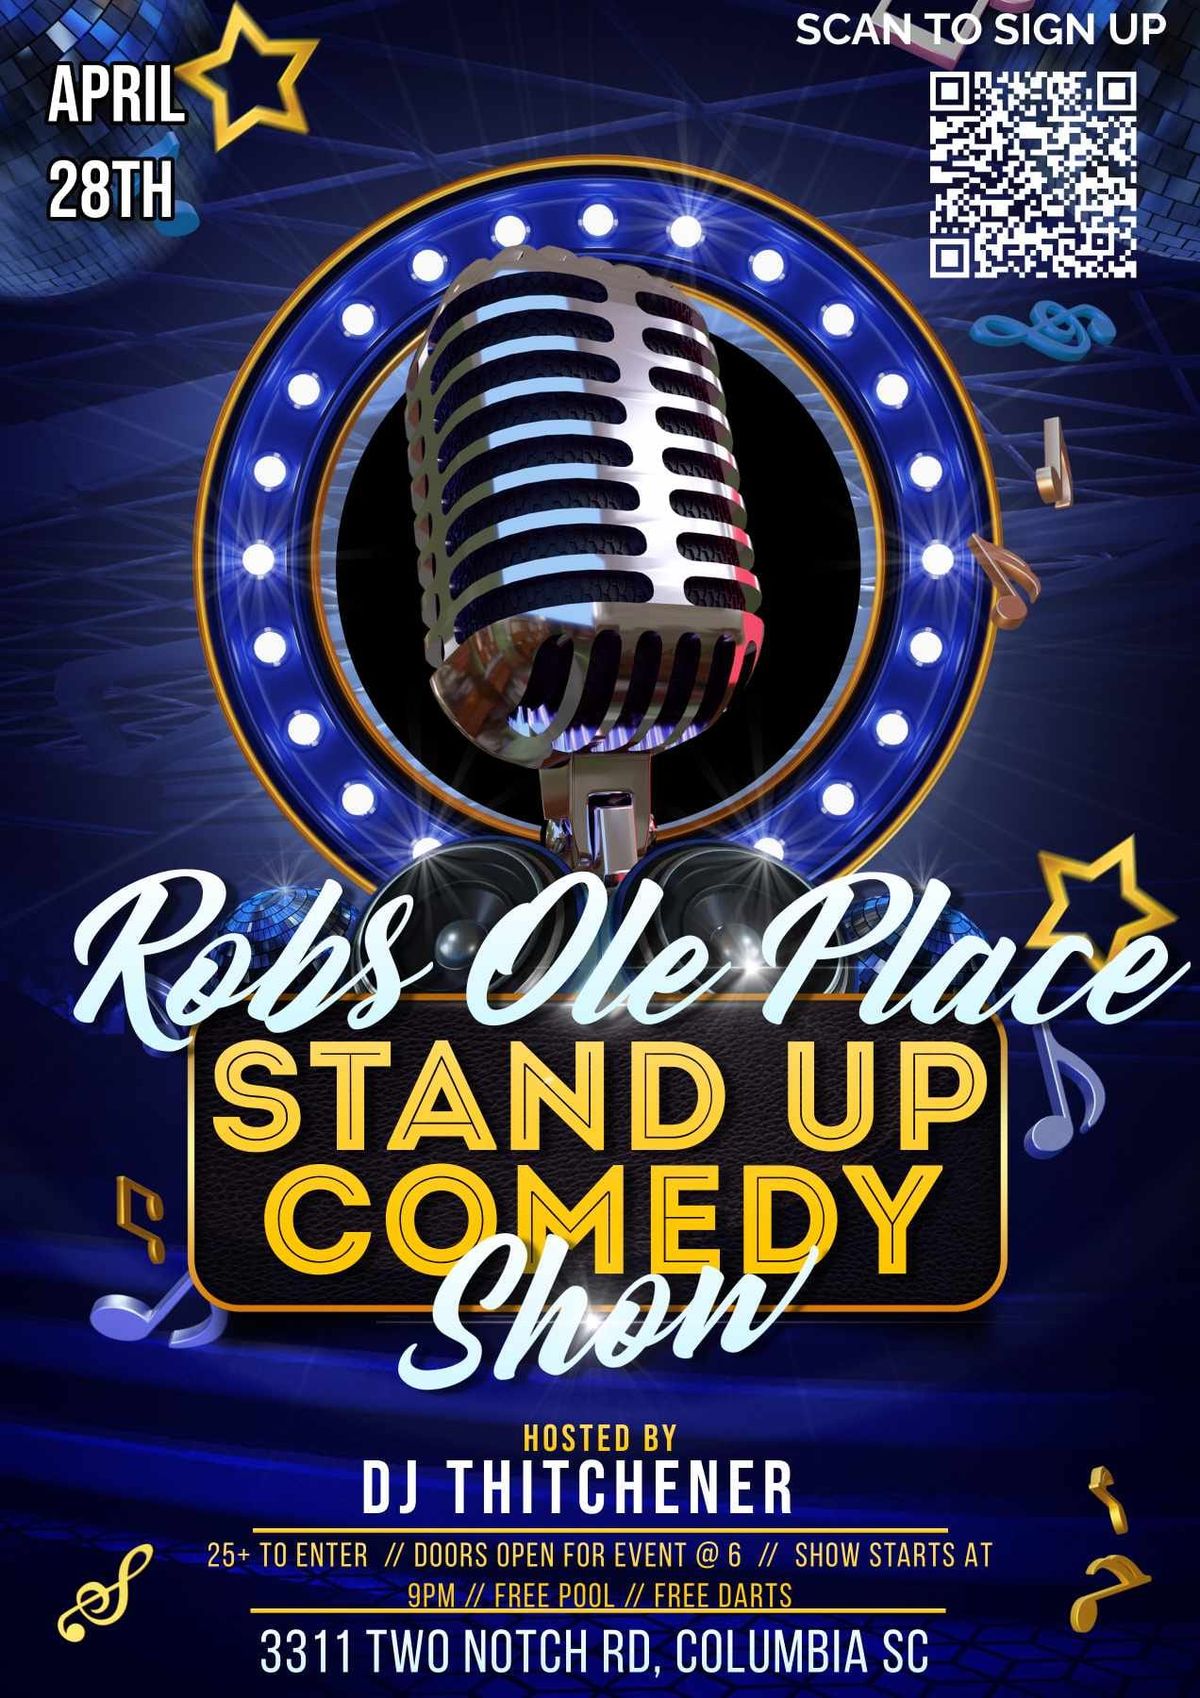 1st Ever Comedy Night at Robs Ole Place